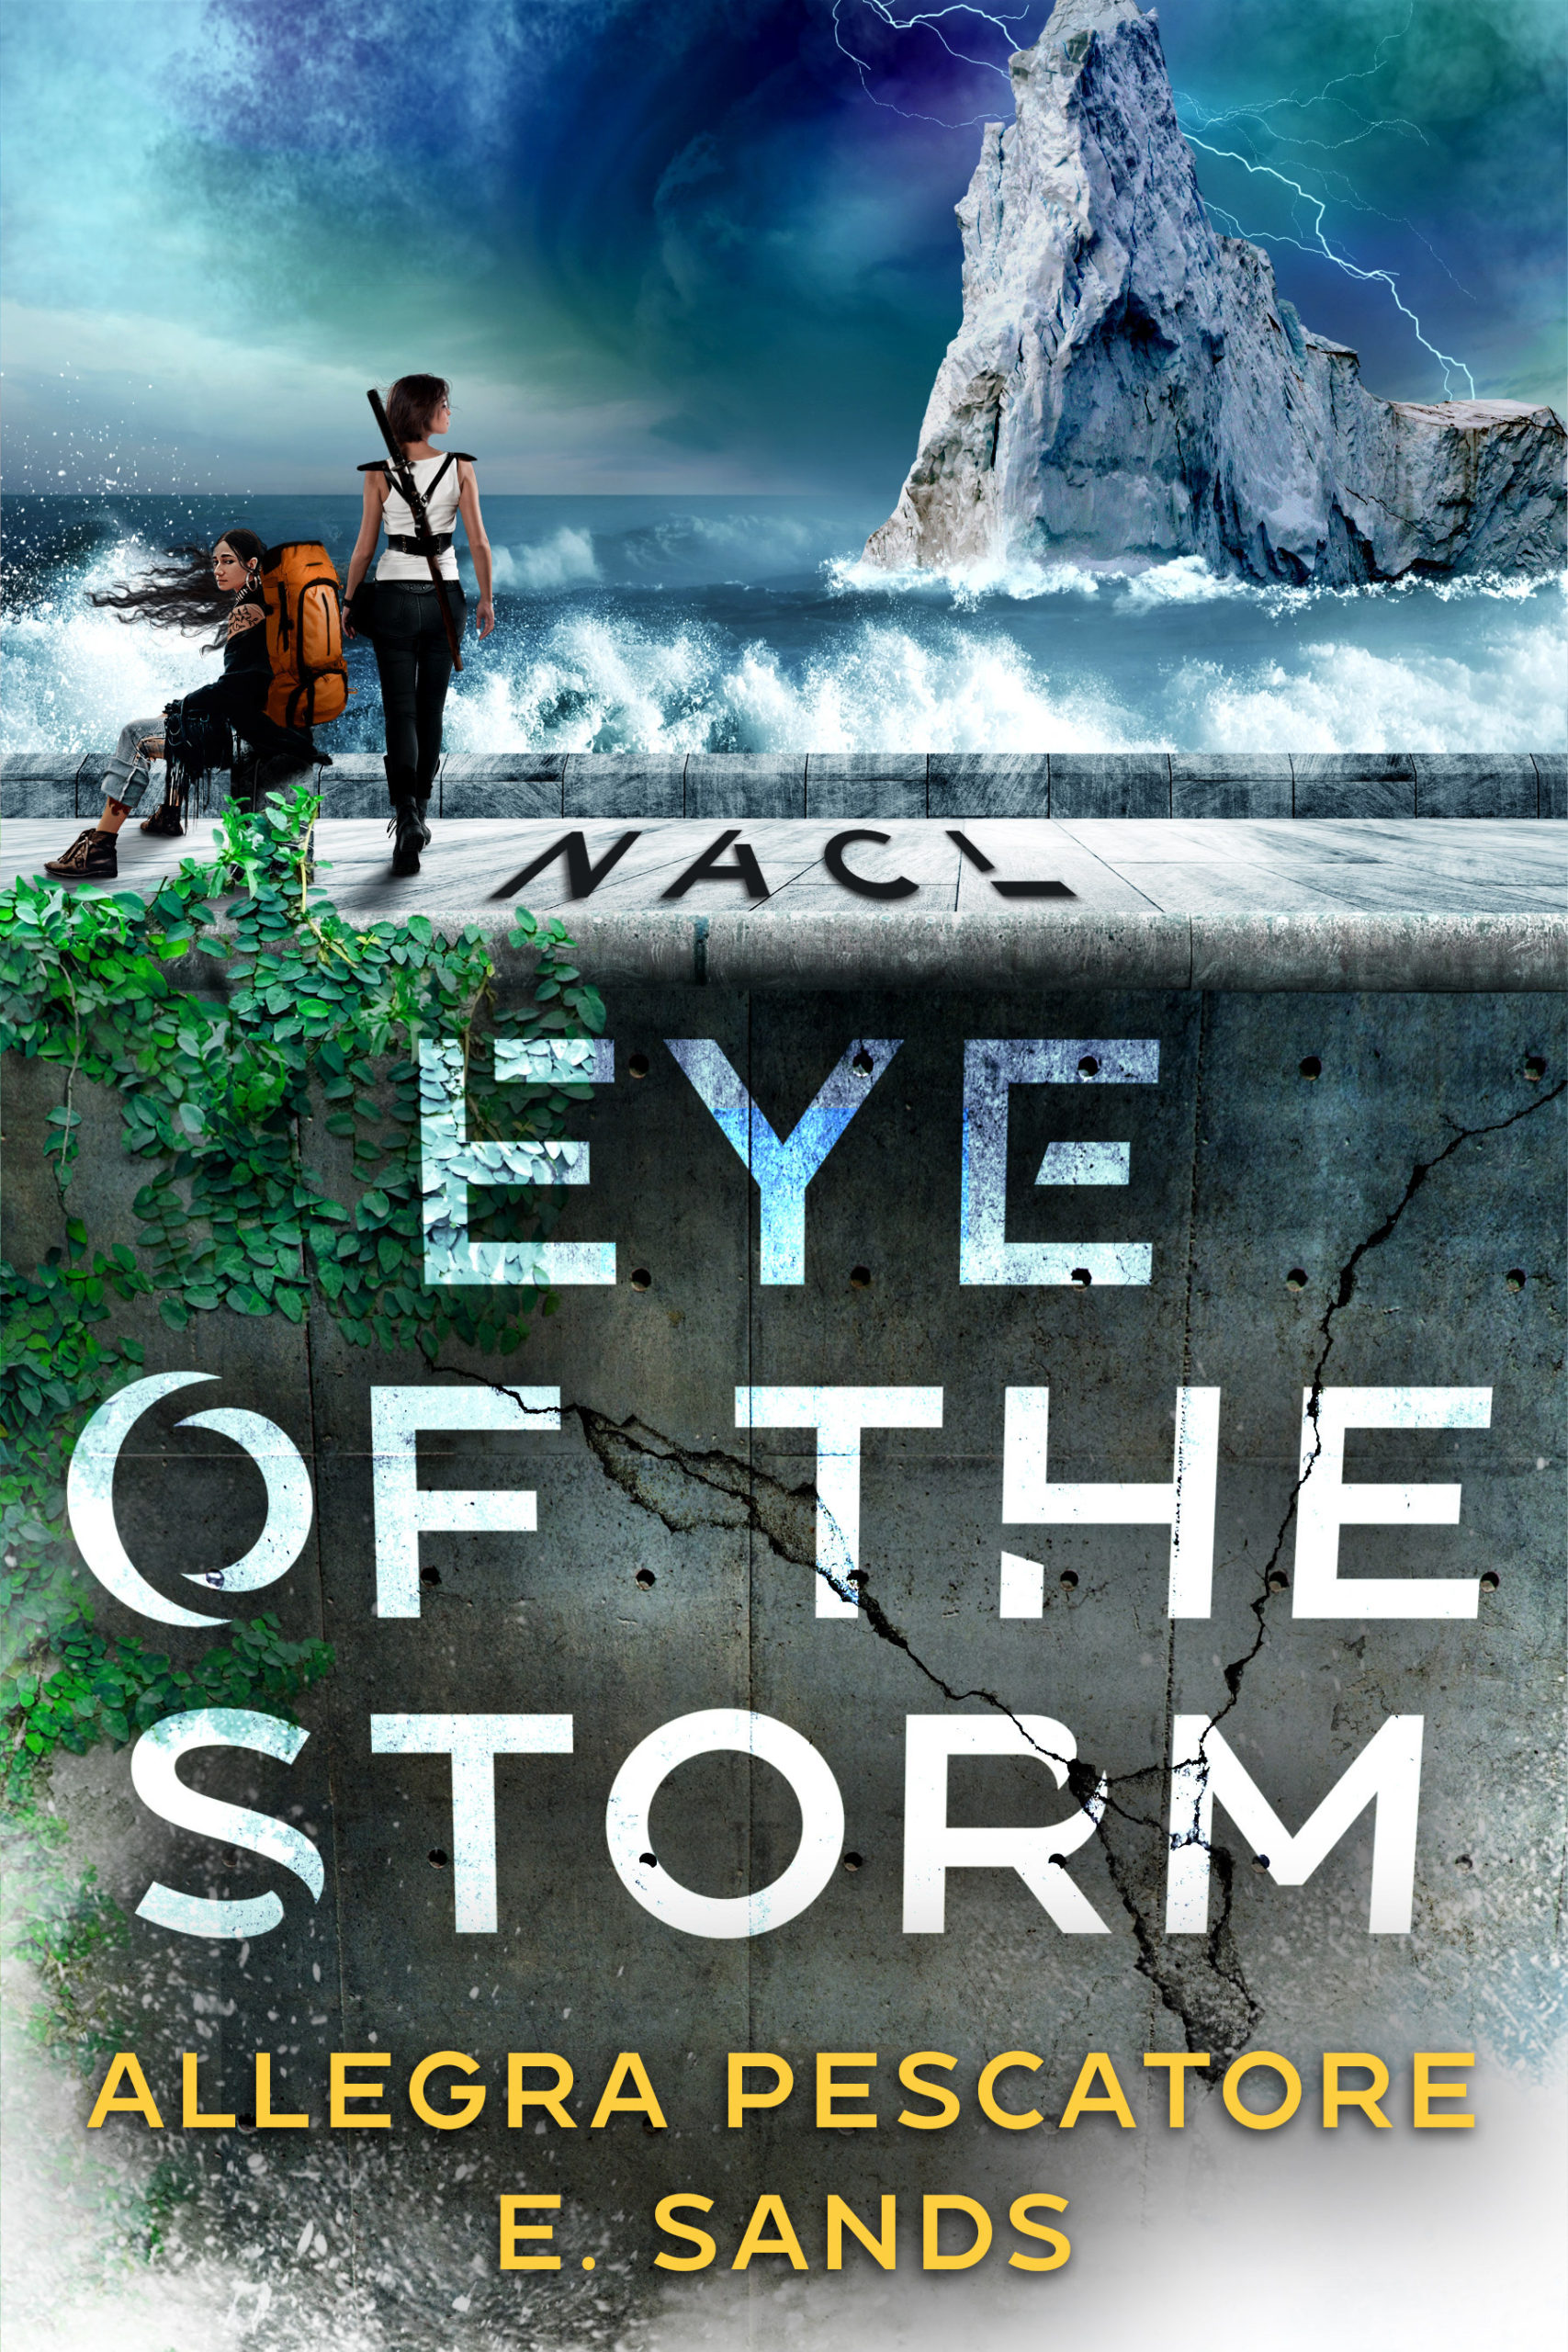 NACL: Eye of the Storm